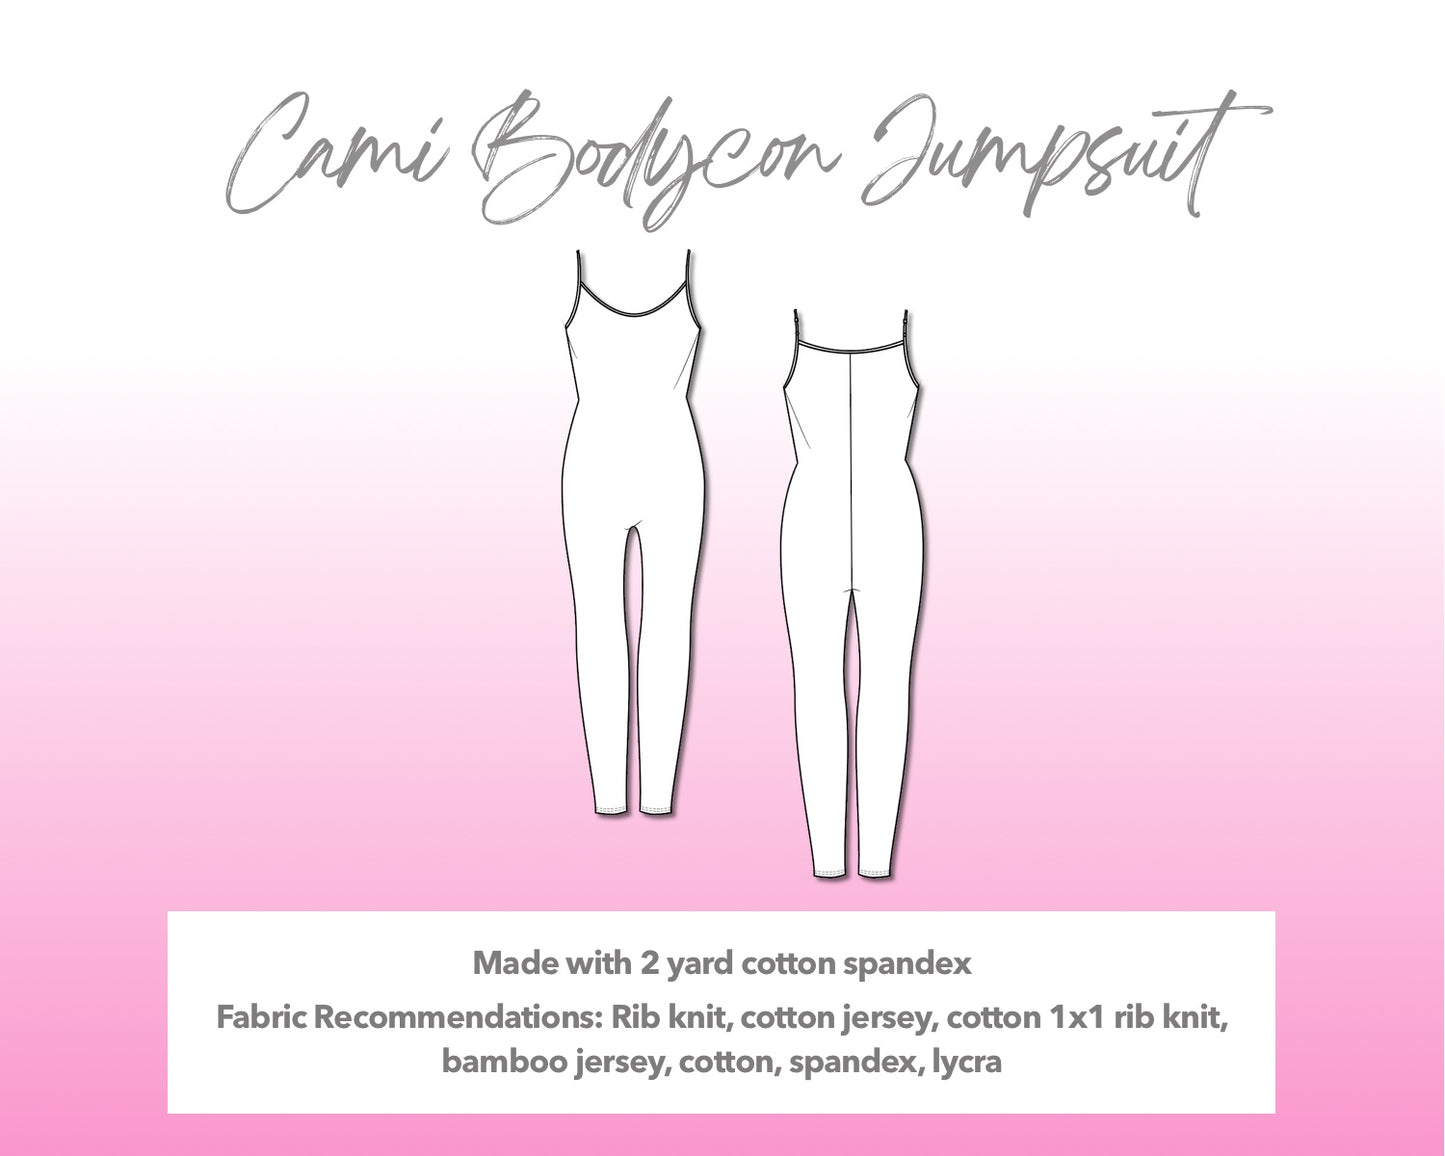 Illustration and detailed description for Cami Bodycon Jumpsuit sewing pattern.